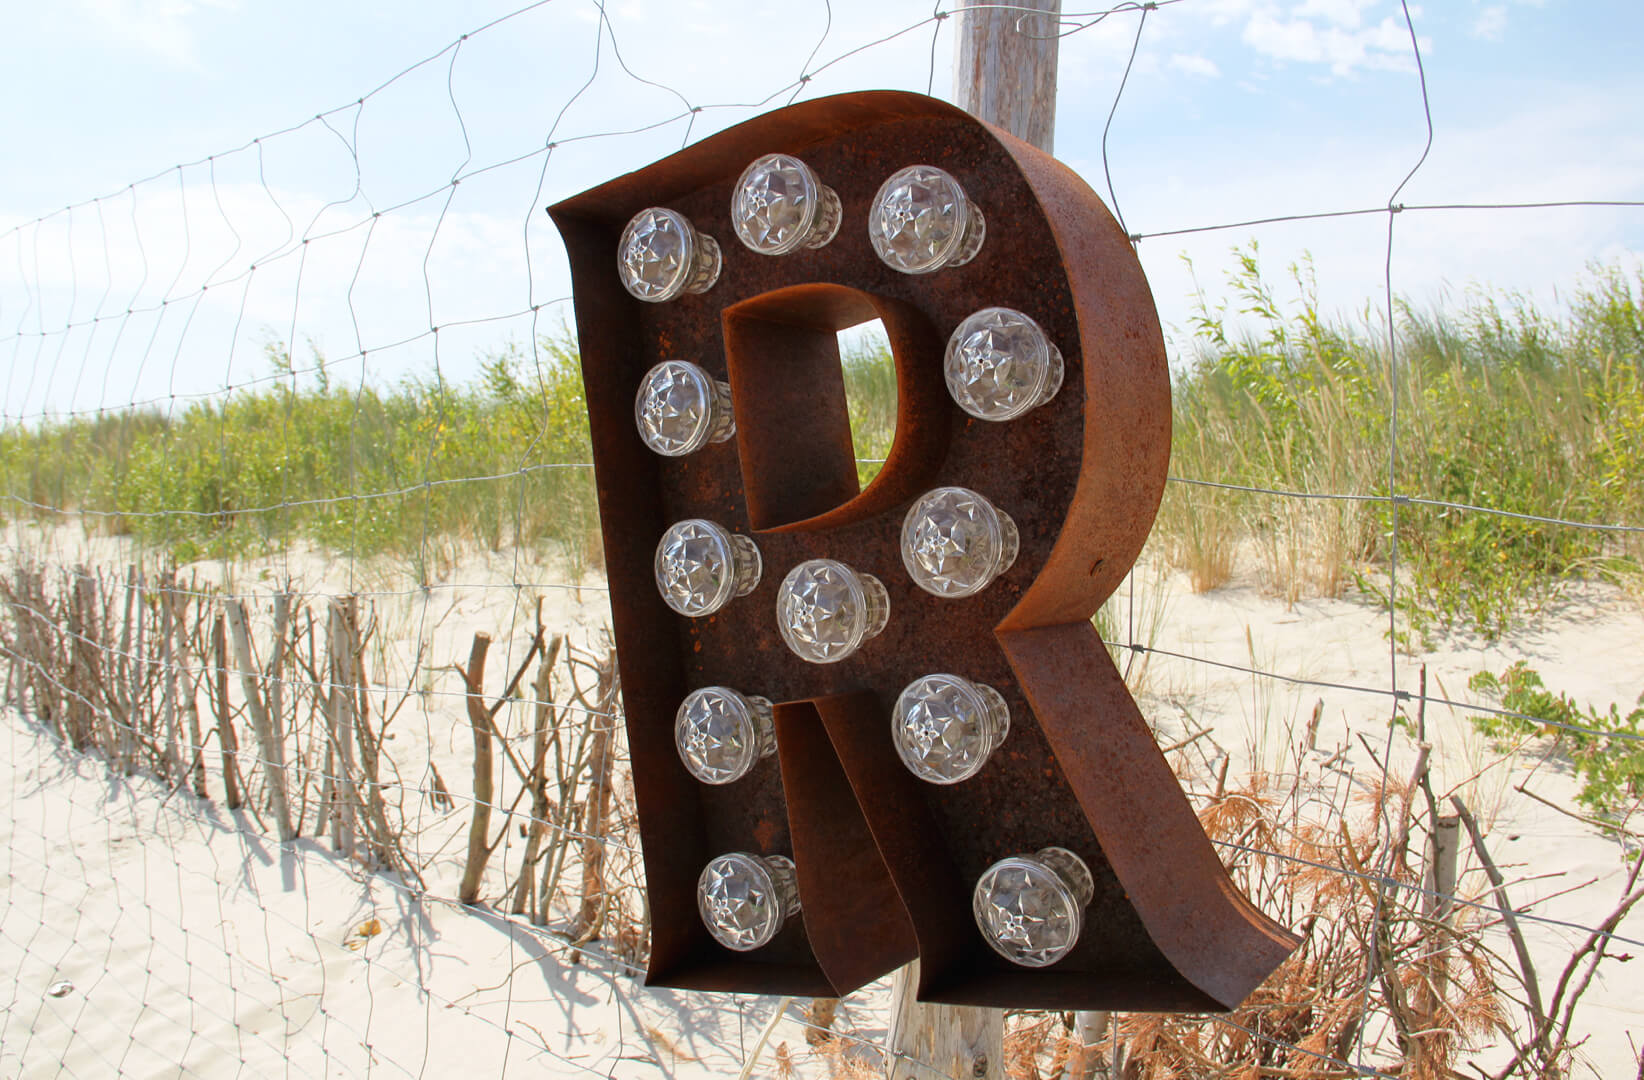 Rusted letters with light bulbs - letters-with-lights-rusted-industrial-metal-lettering-literature-lit-space-metal-lettering-literature-lit-retro-literature-literature-literature-literature-literature-literature-literature-literature-literature-literature-literature-literature-literature-literature-literature-literature-literature-literature-literature-literature-literature-literature-literature